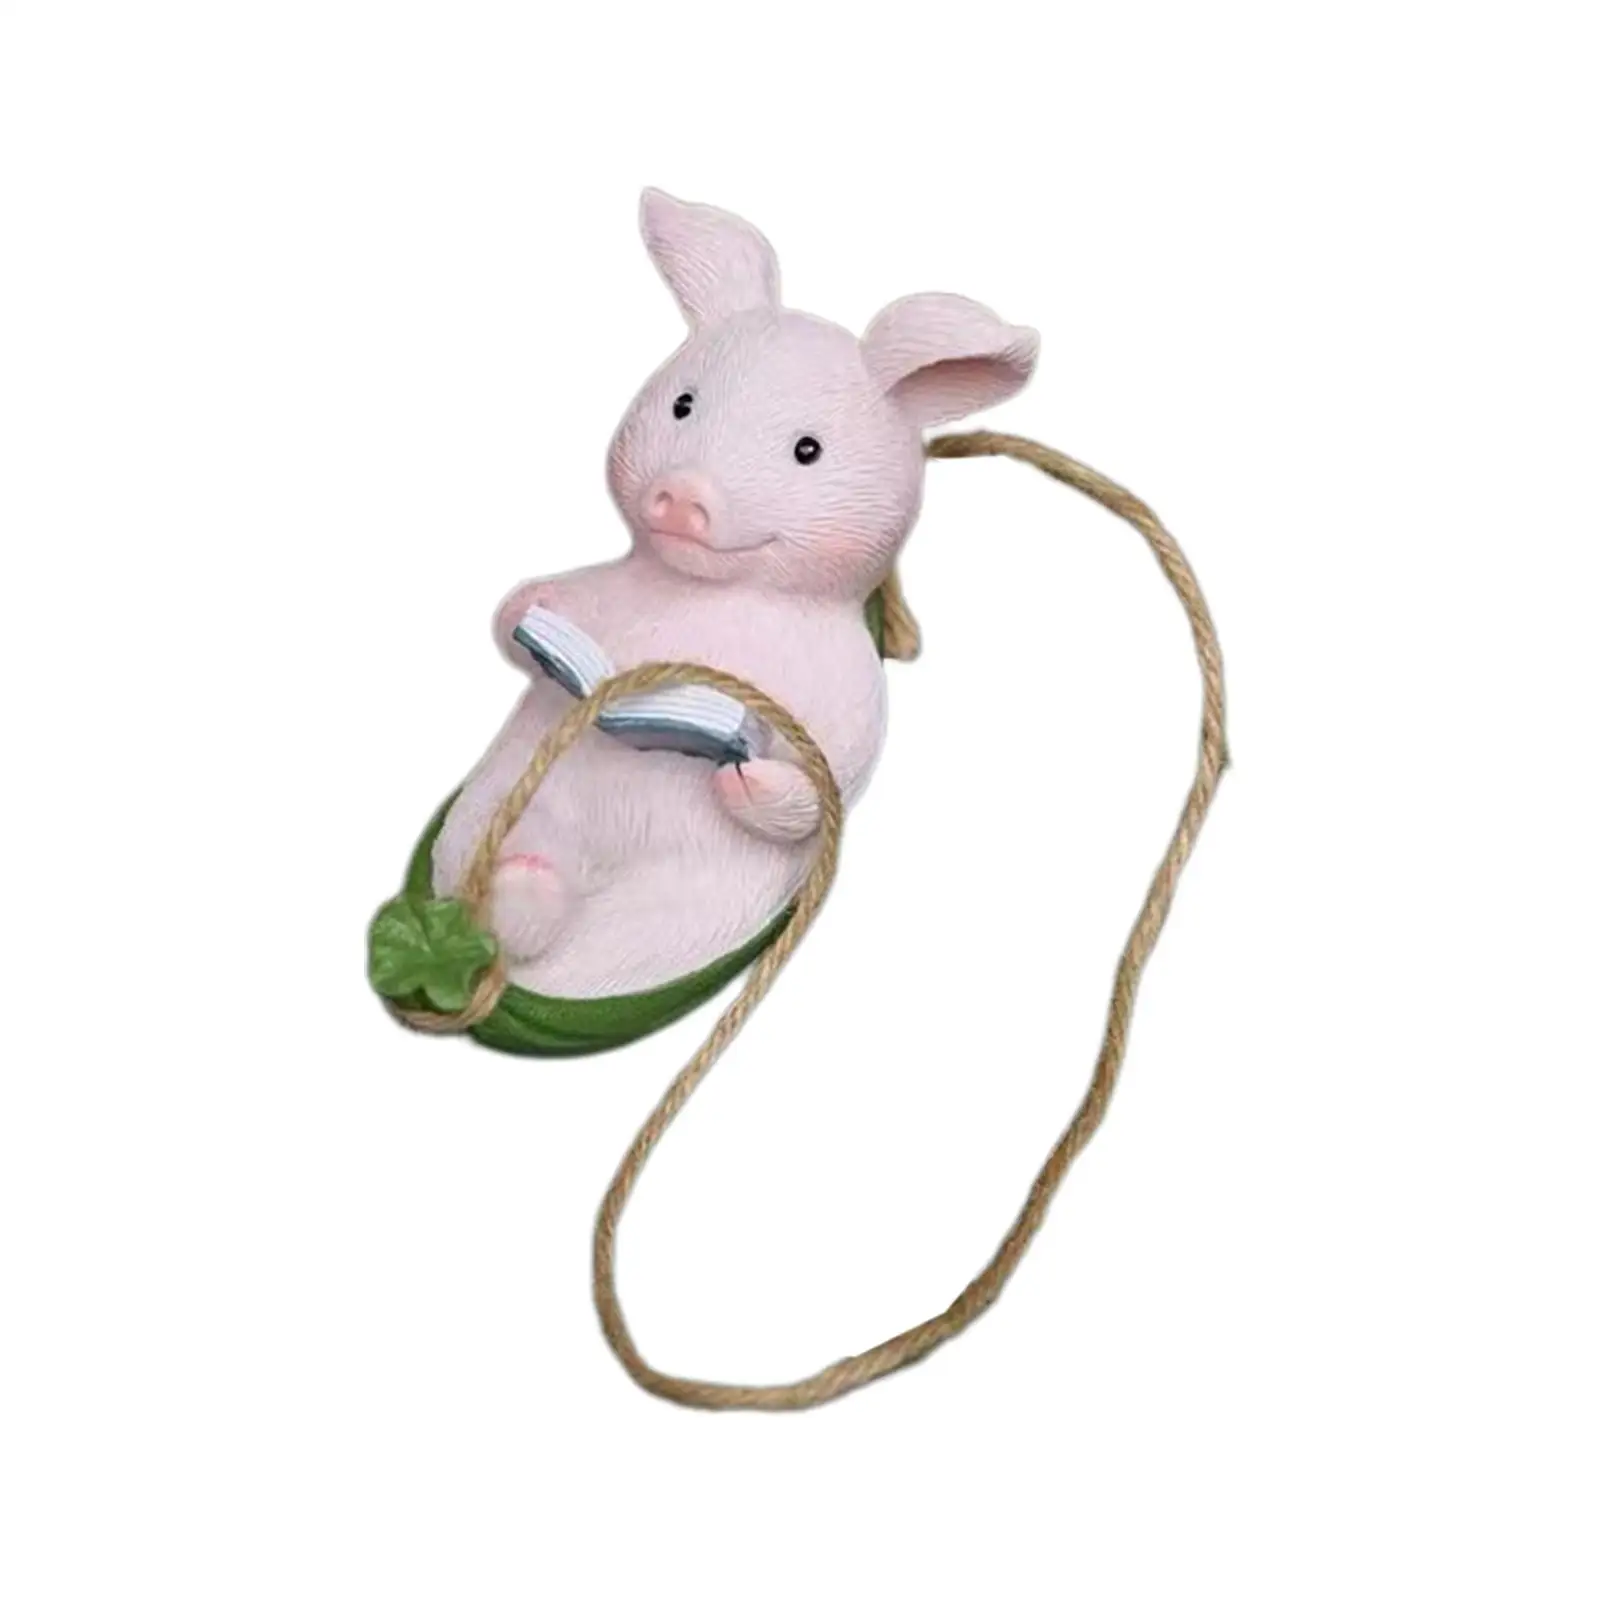 Hanging Outdoor Pig Statues Lovely Decoration Pig Outdoor Garden Sculpture Animal Ornament for Garden Yard Patio Outside Decor